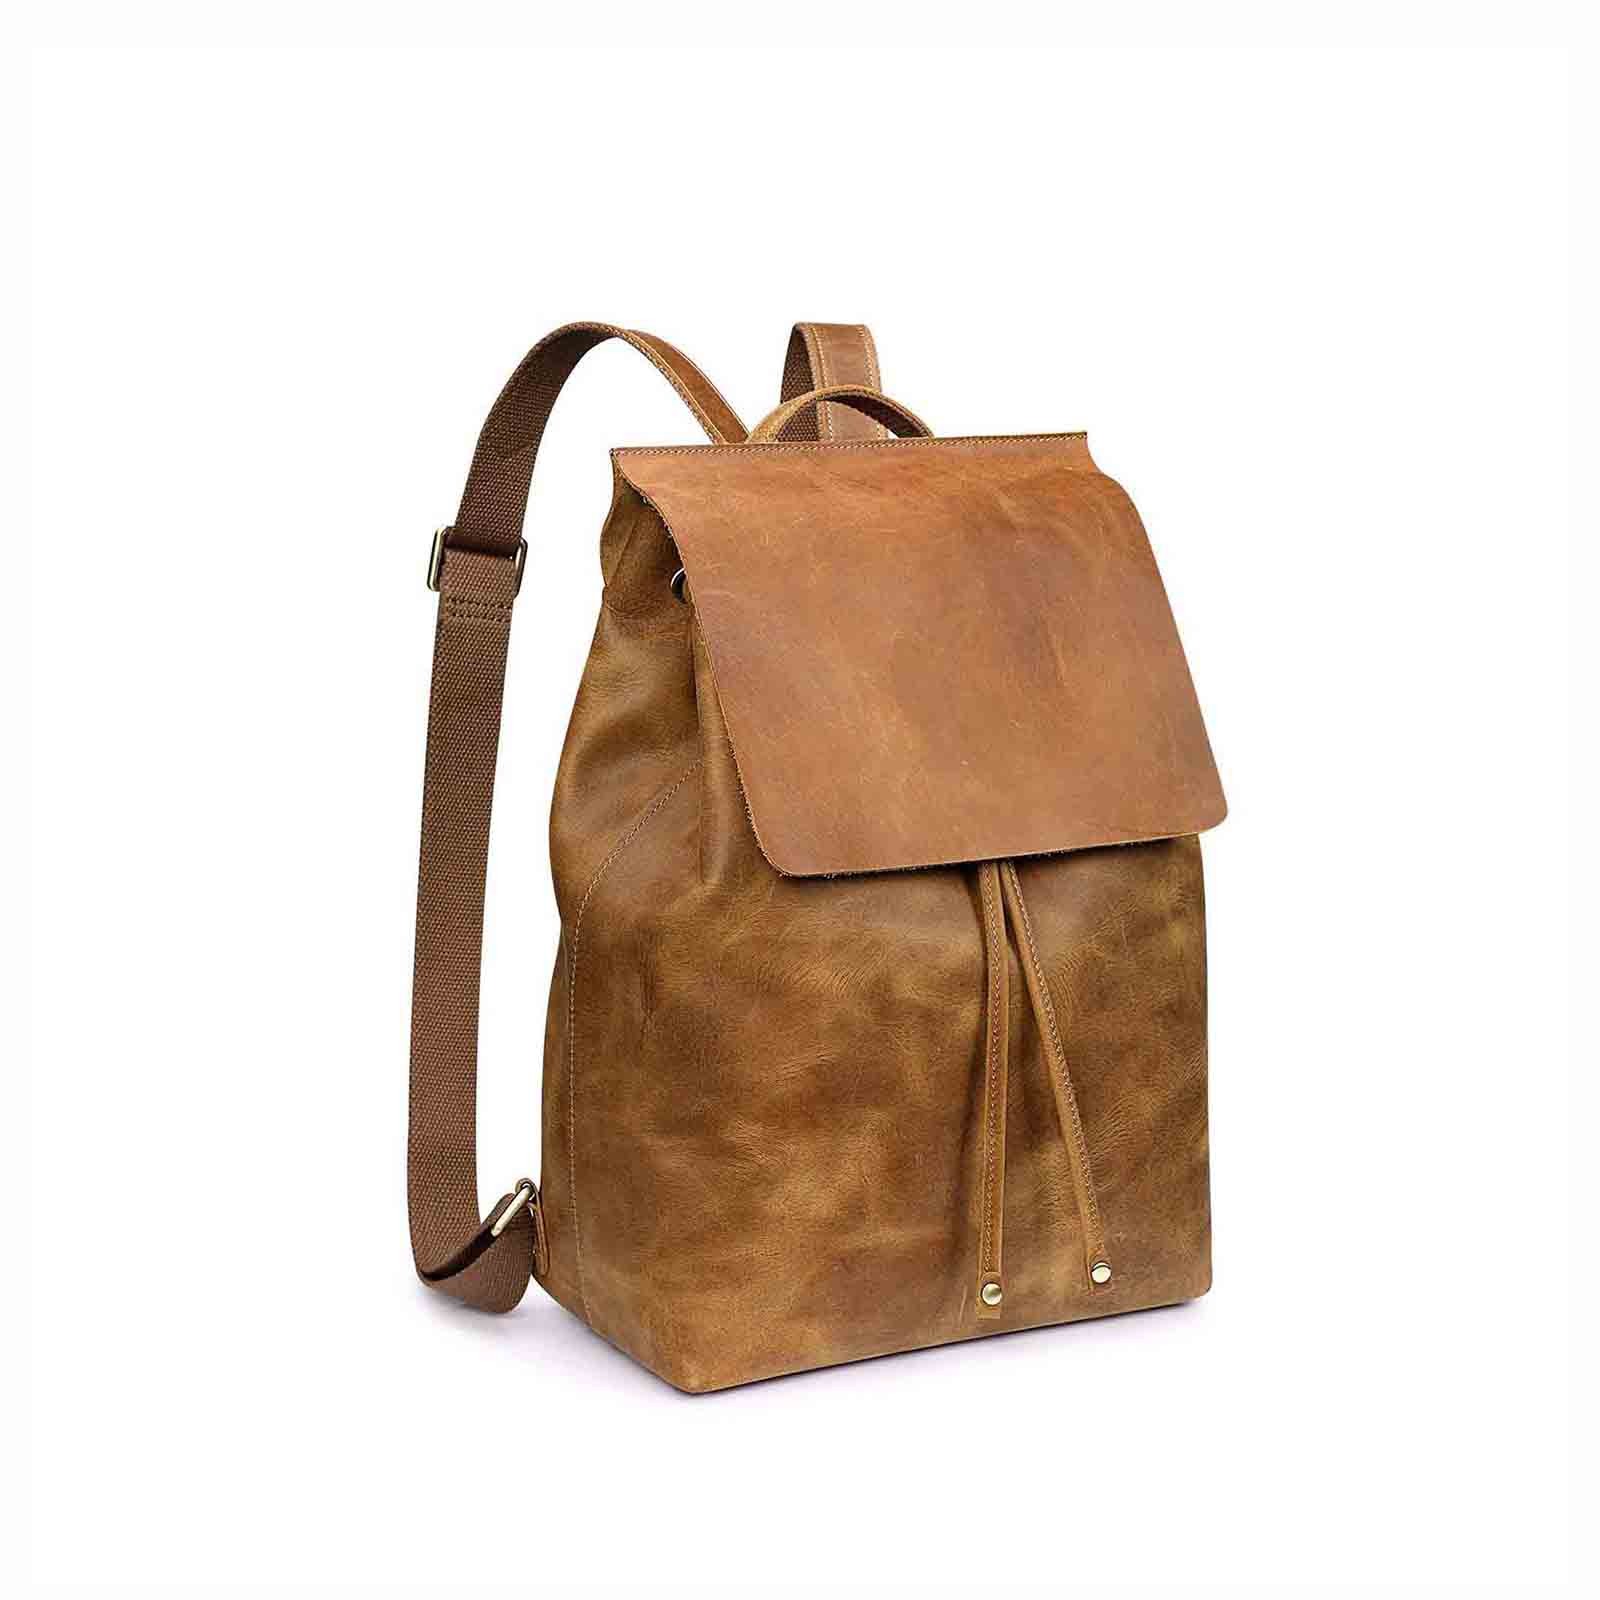 Crazy Horse Leather Backpack - Mother's day gift giving